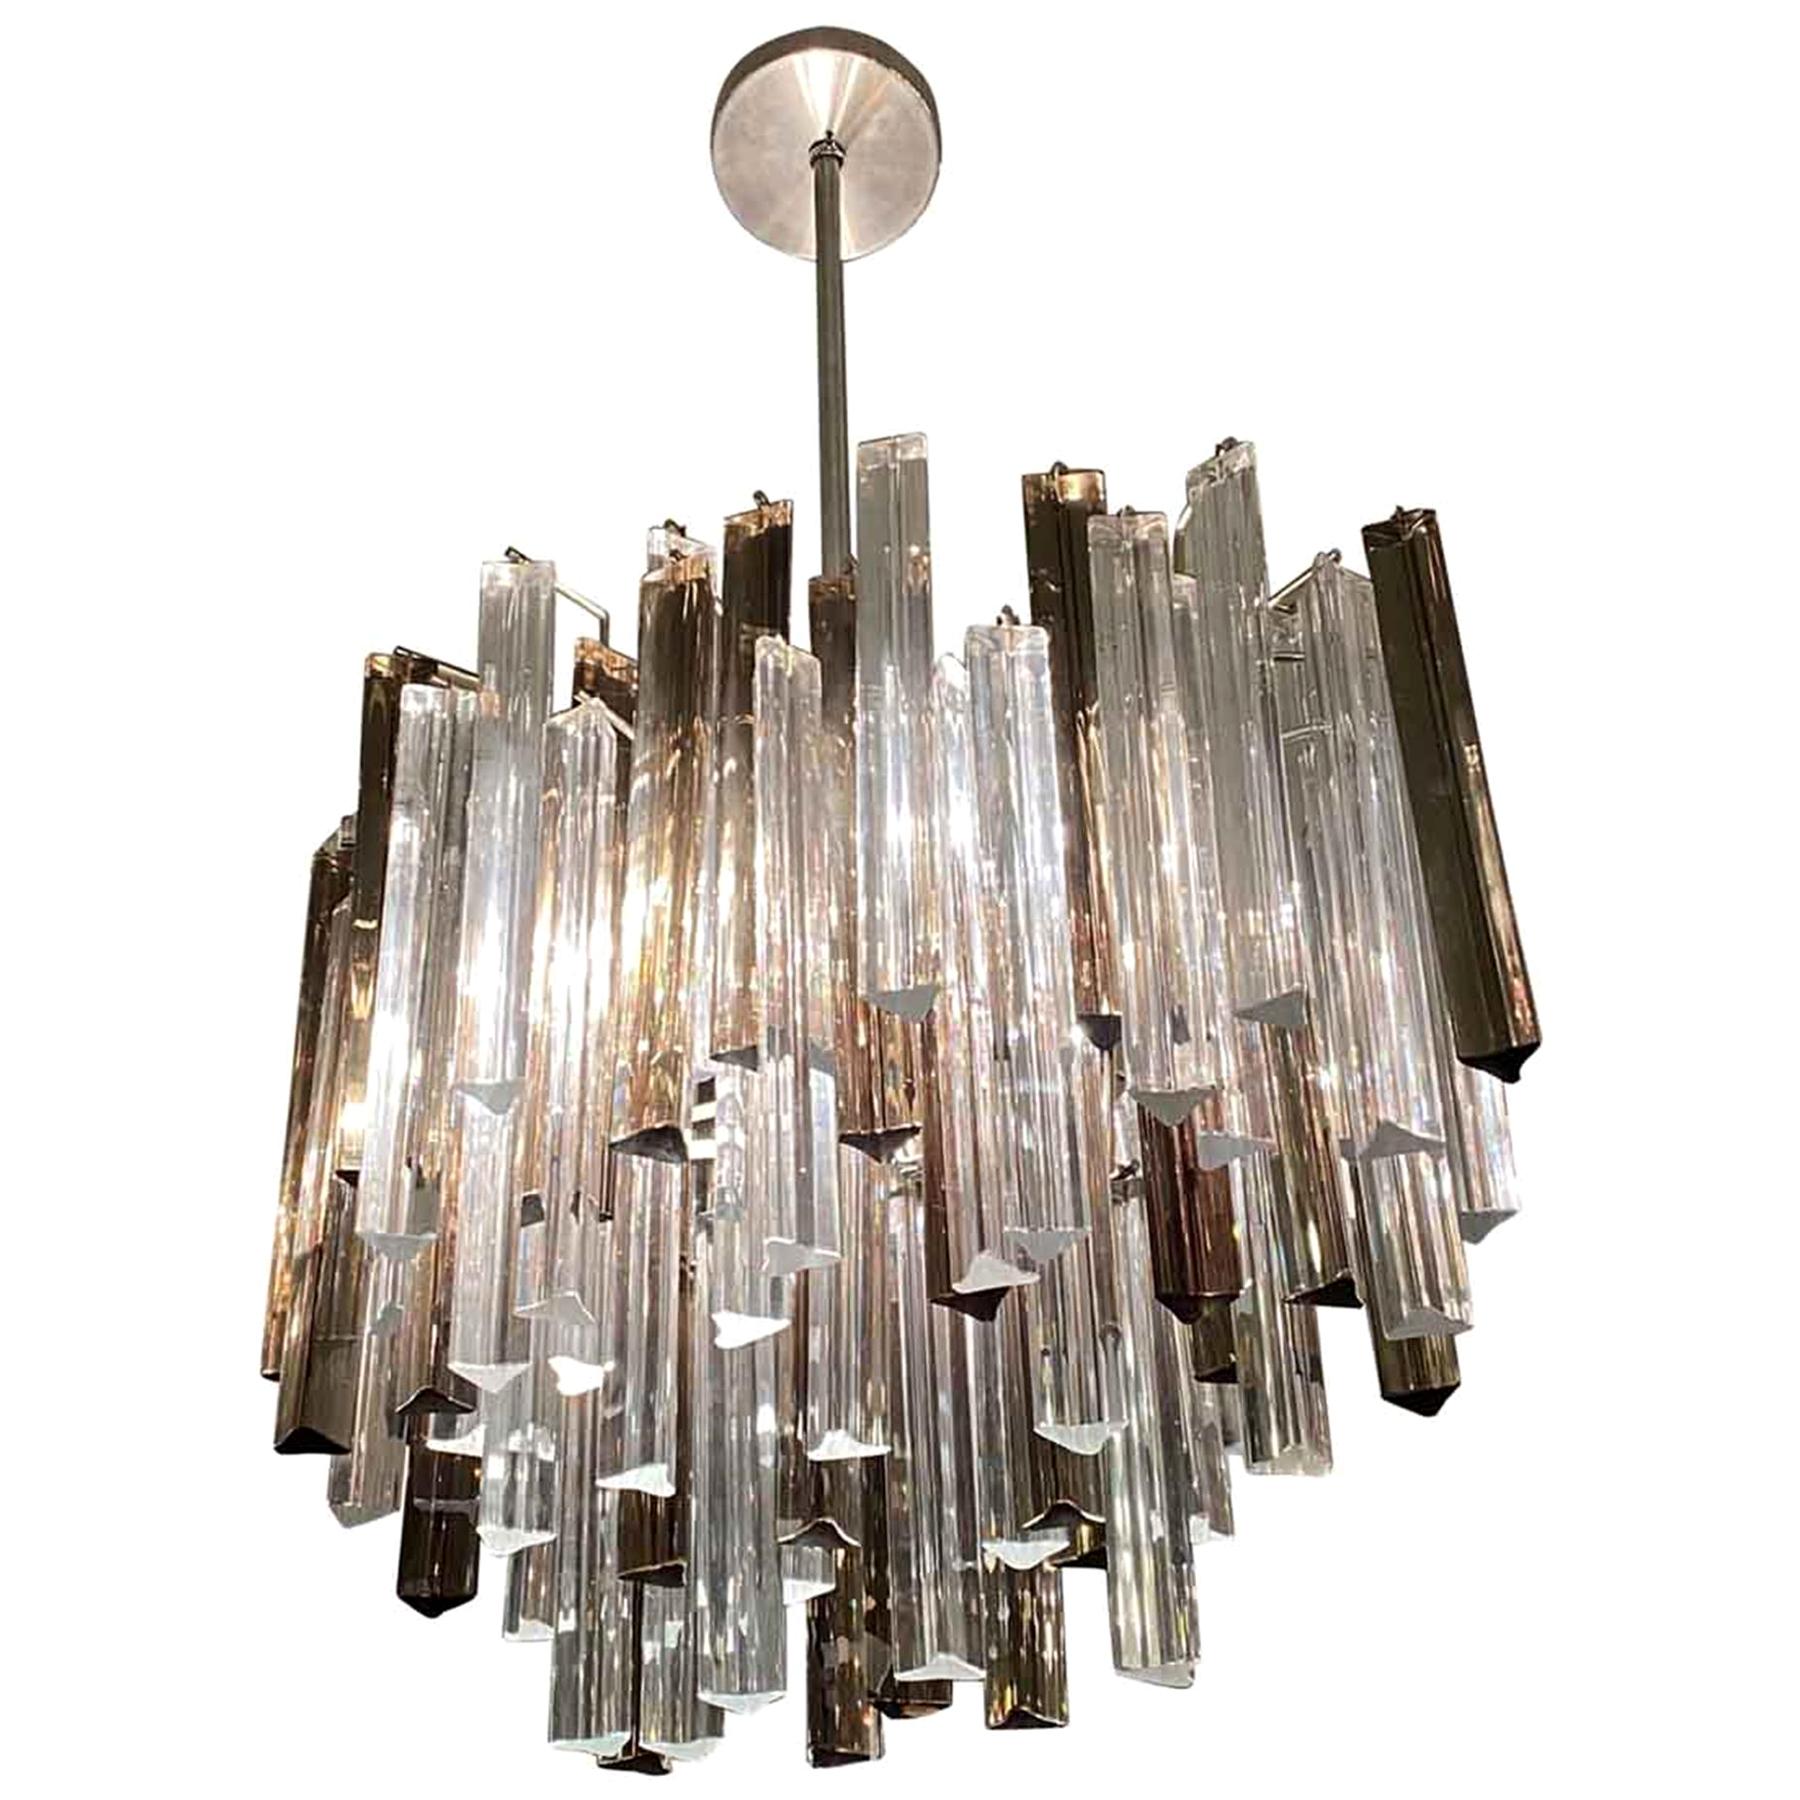 1970s Camer Glass Venini Midcentury Chandelier in Two-Tone Prisms